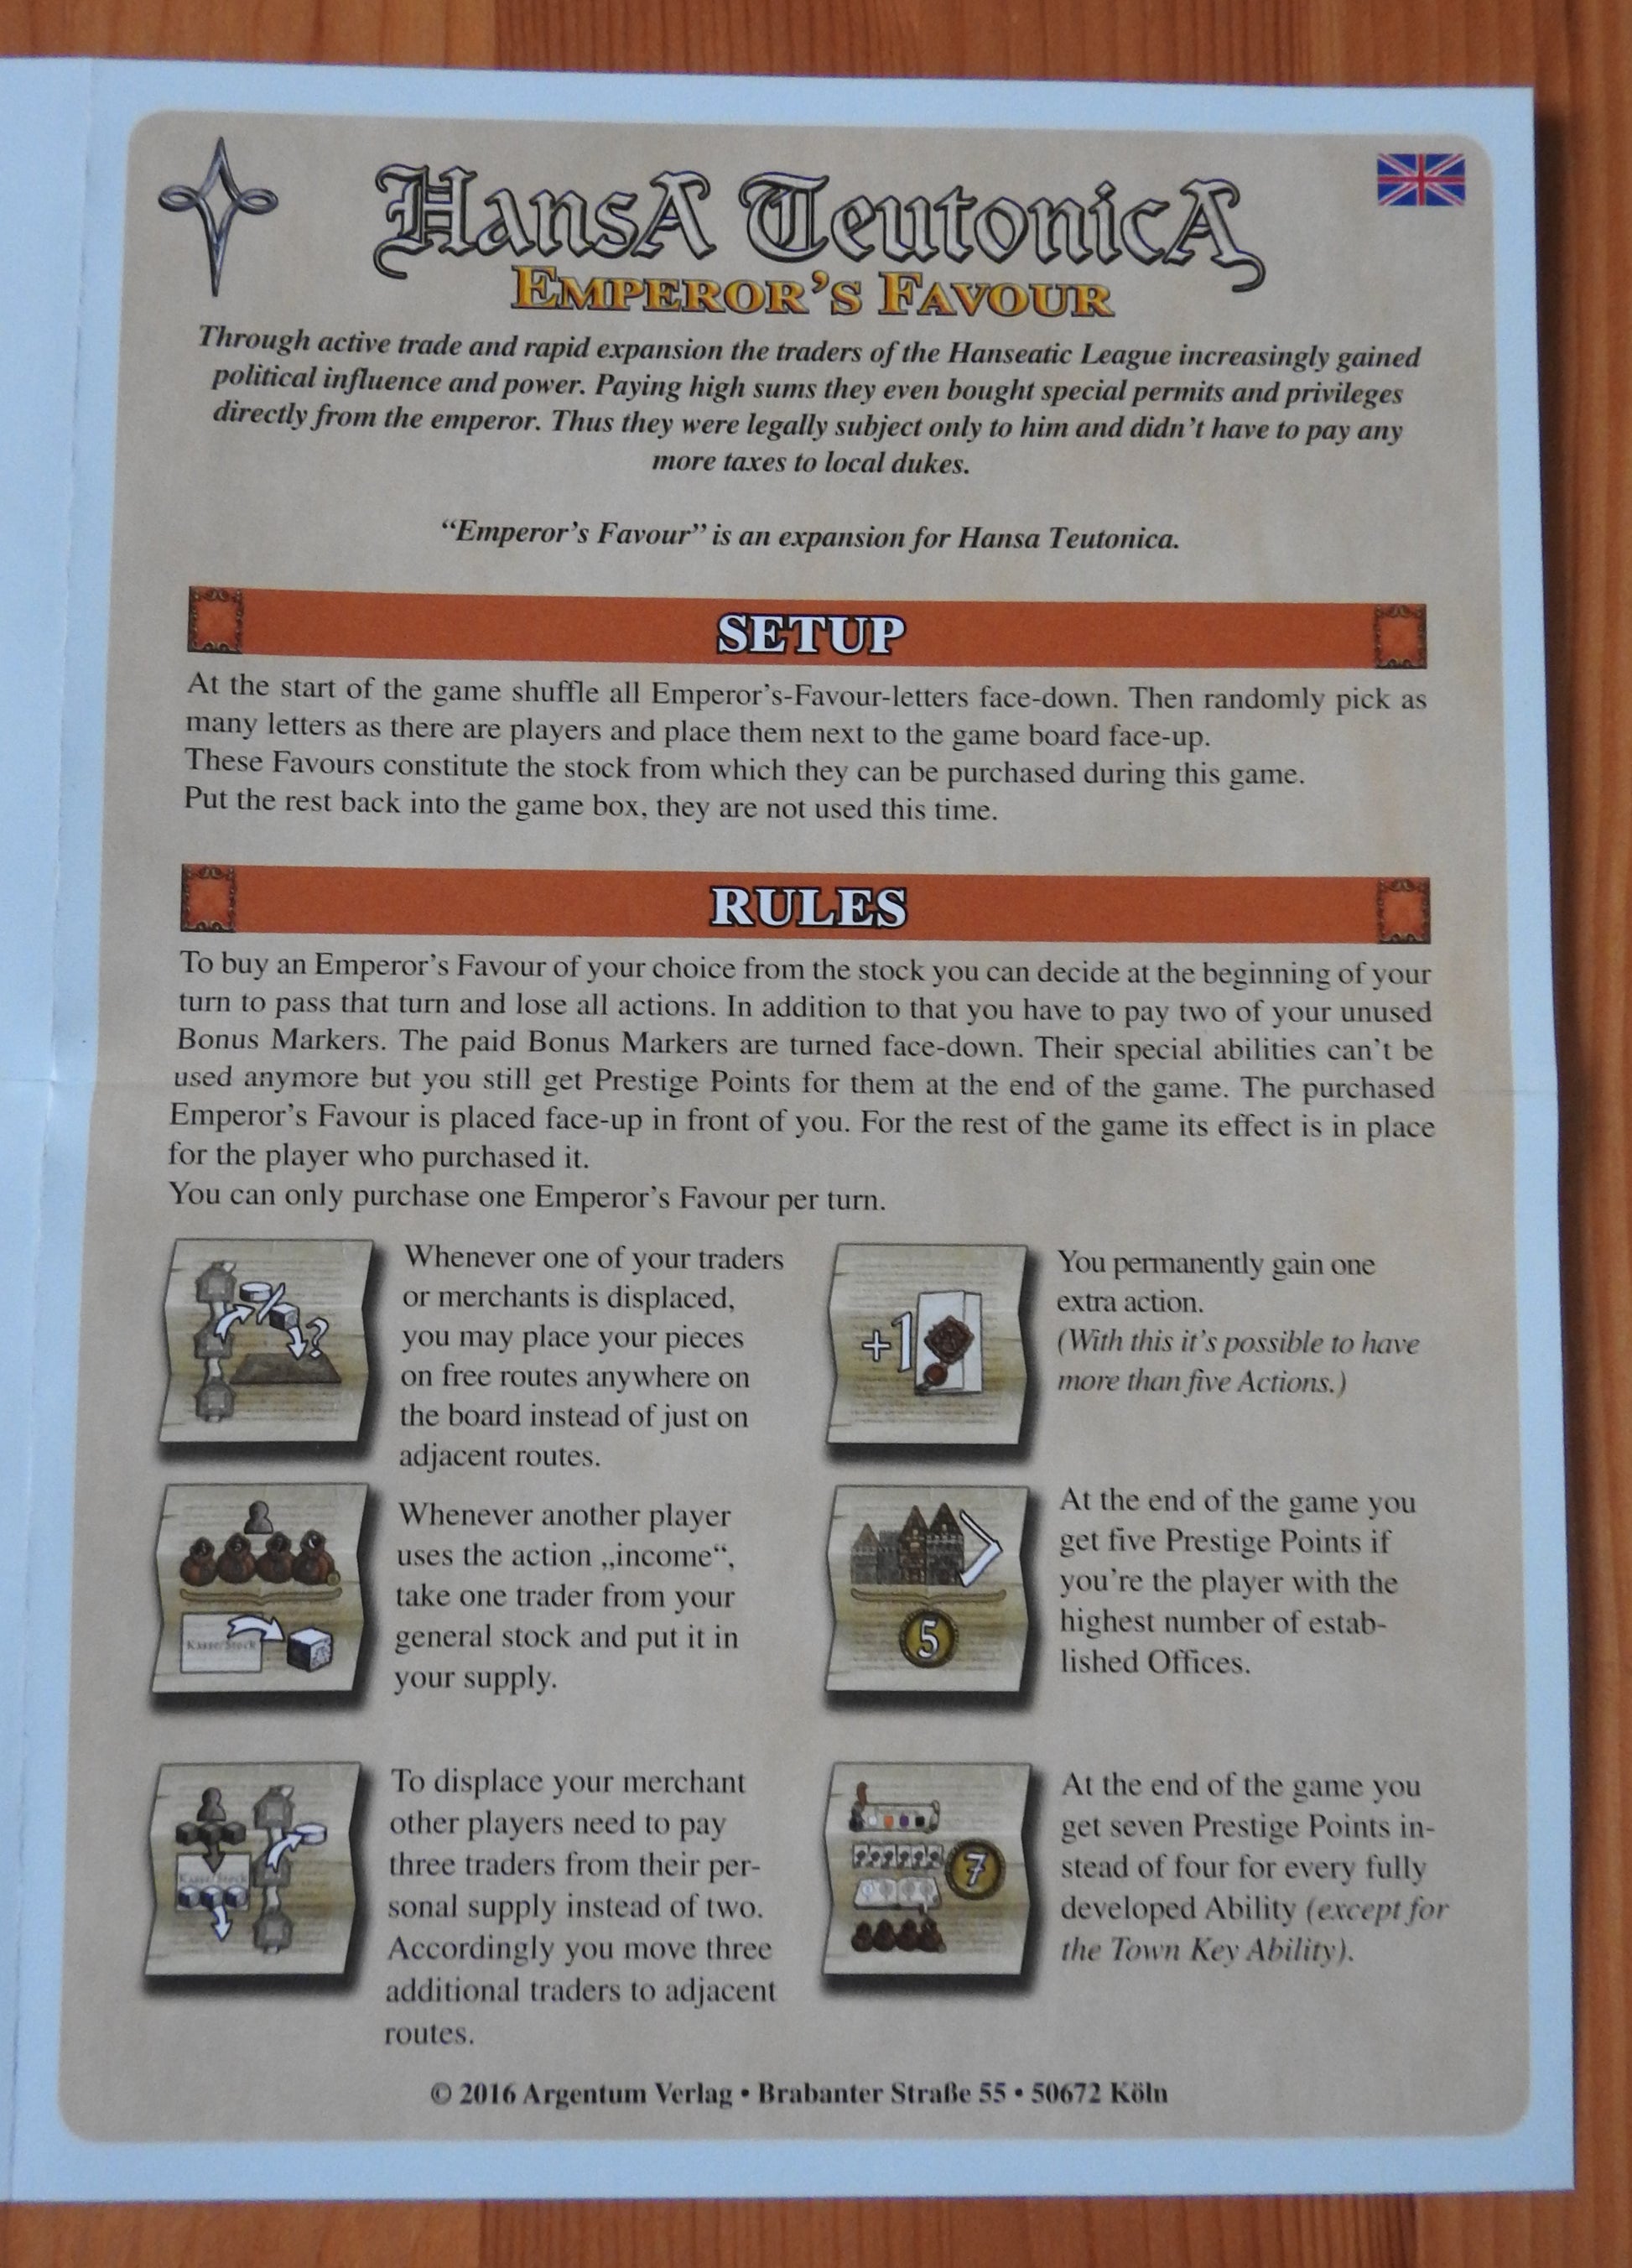 A view of the English rules that are included.